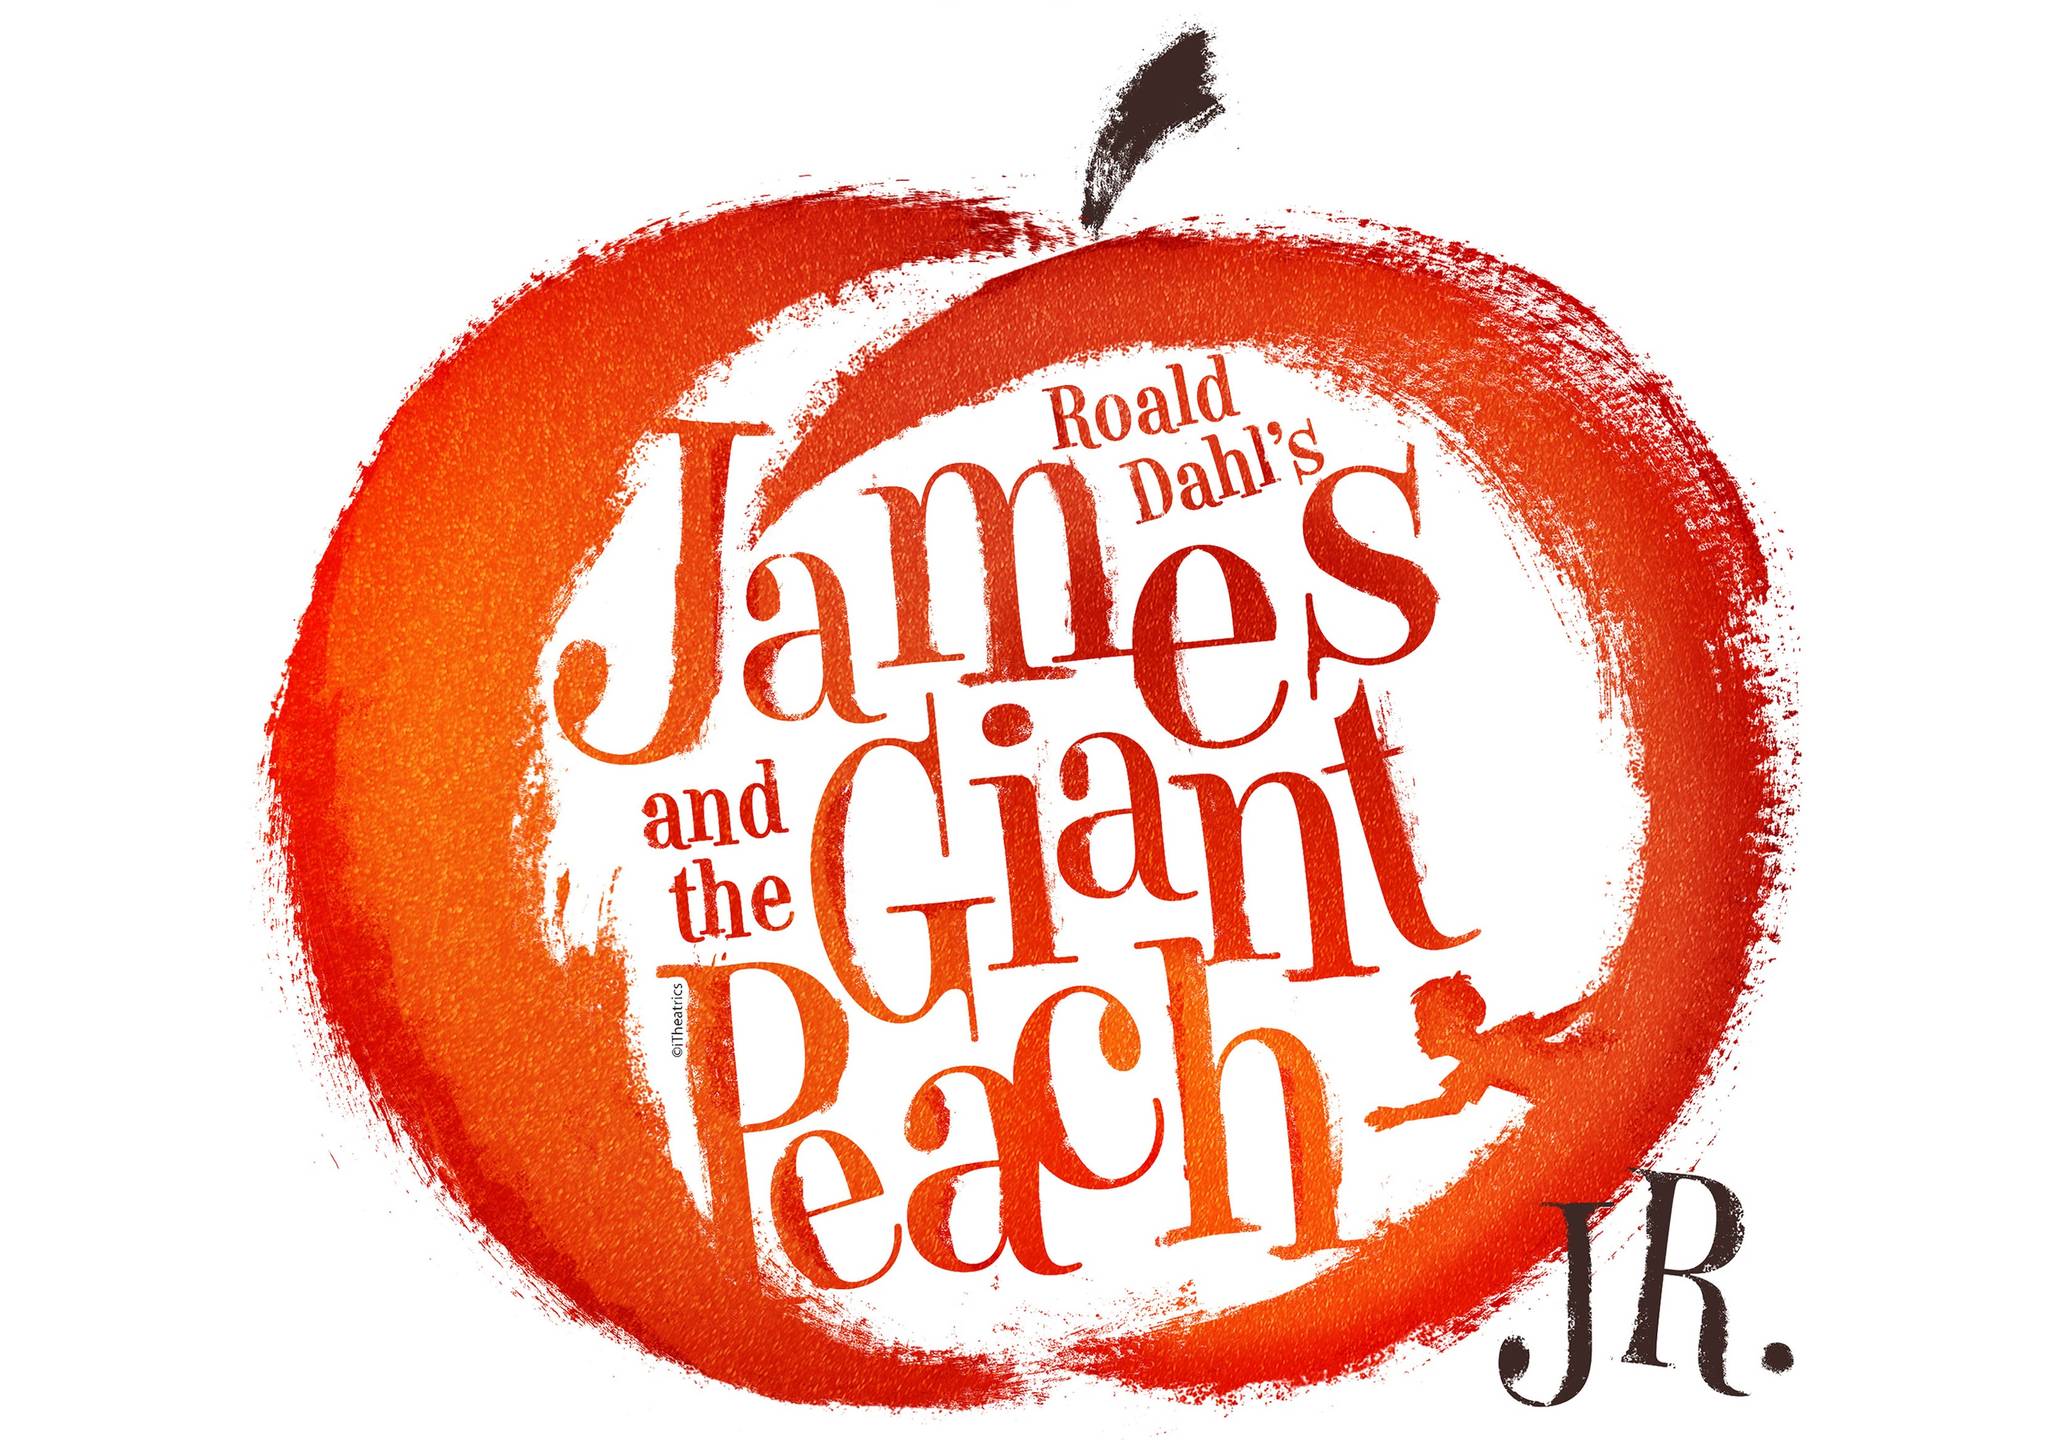 Community theater campers present “James and the Giant Peach Jr.”